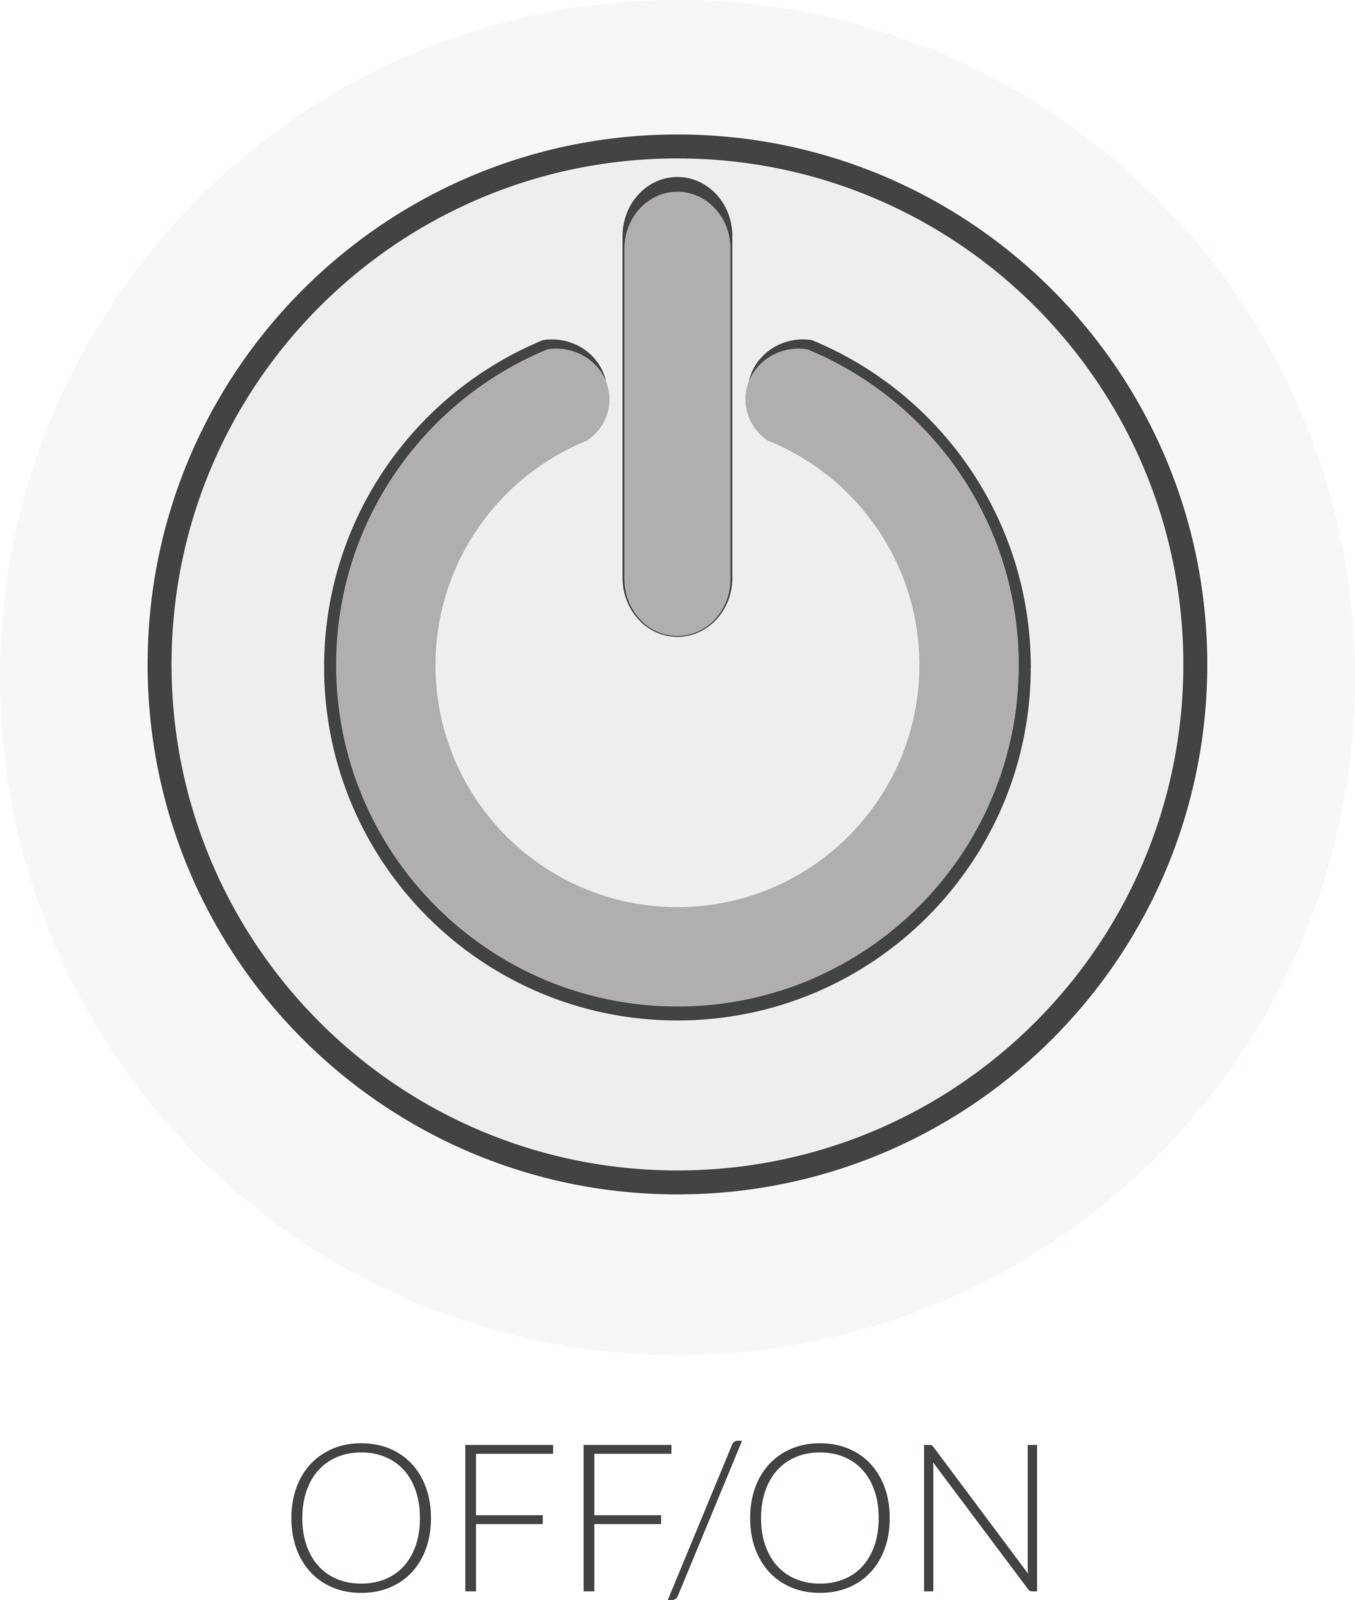 Button power concept by on off button with gray tones by lunarismemo